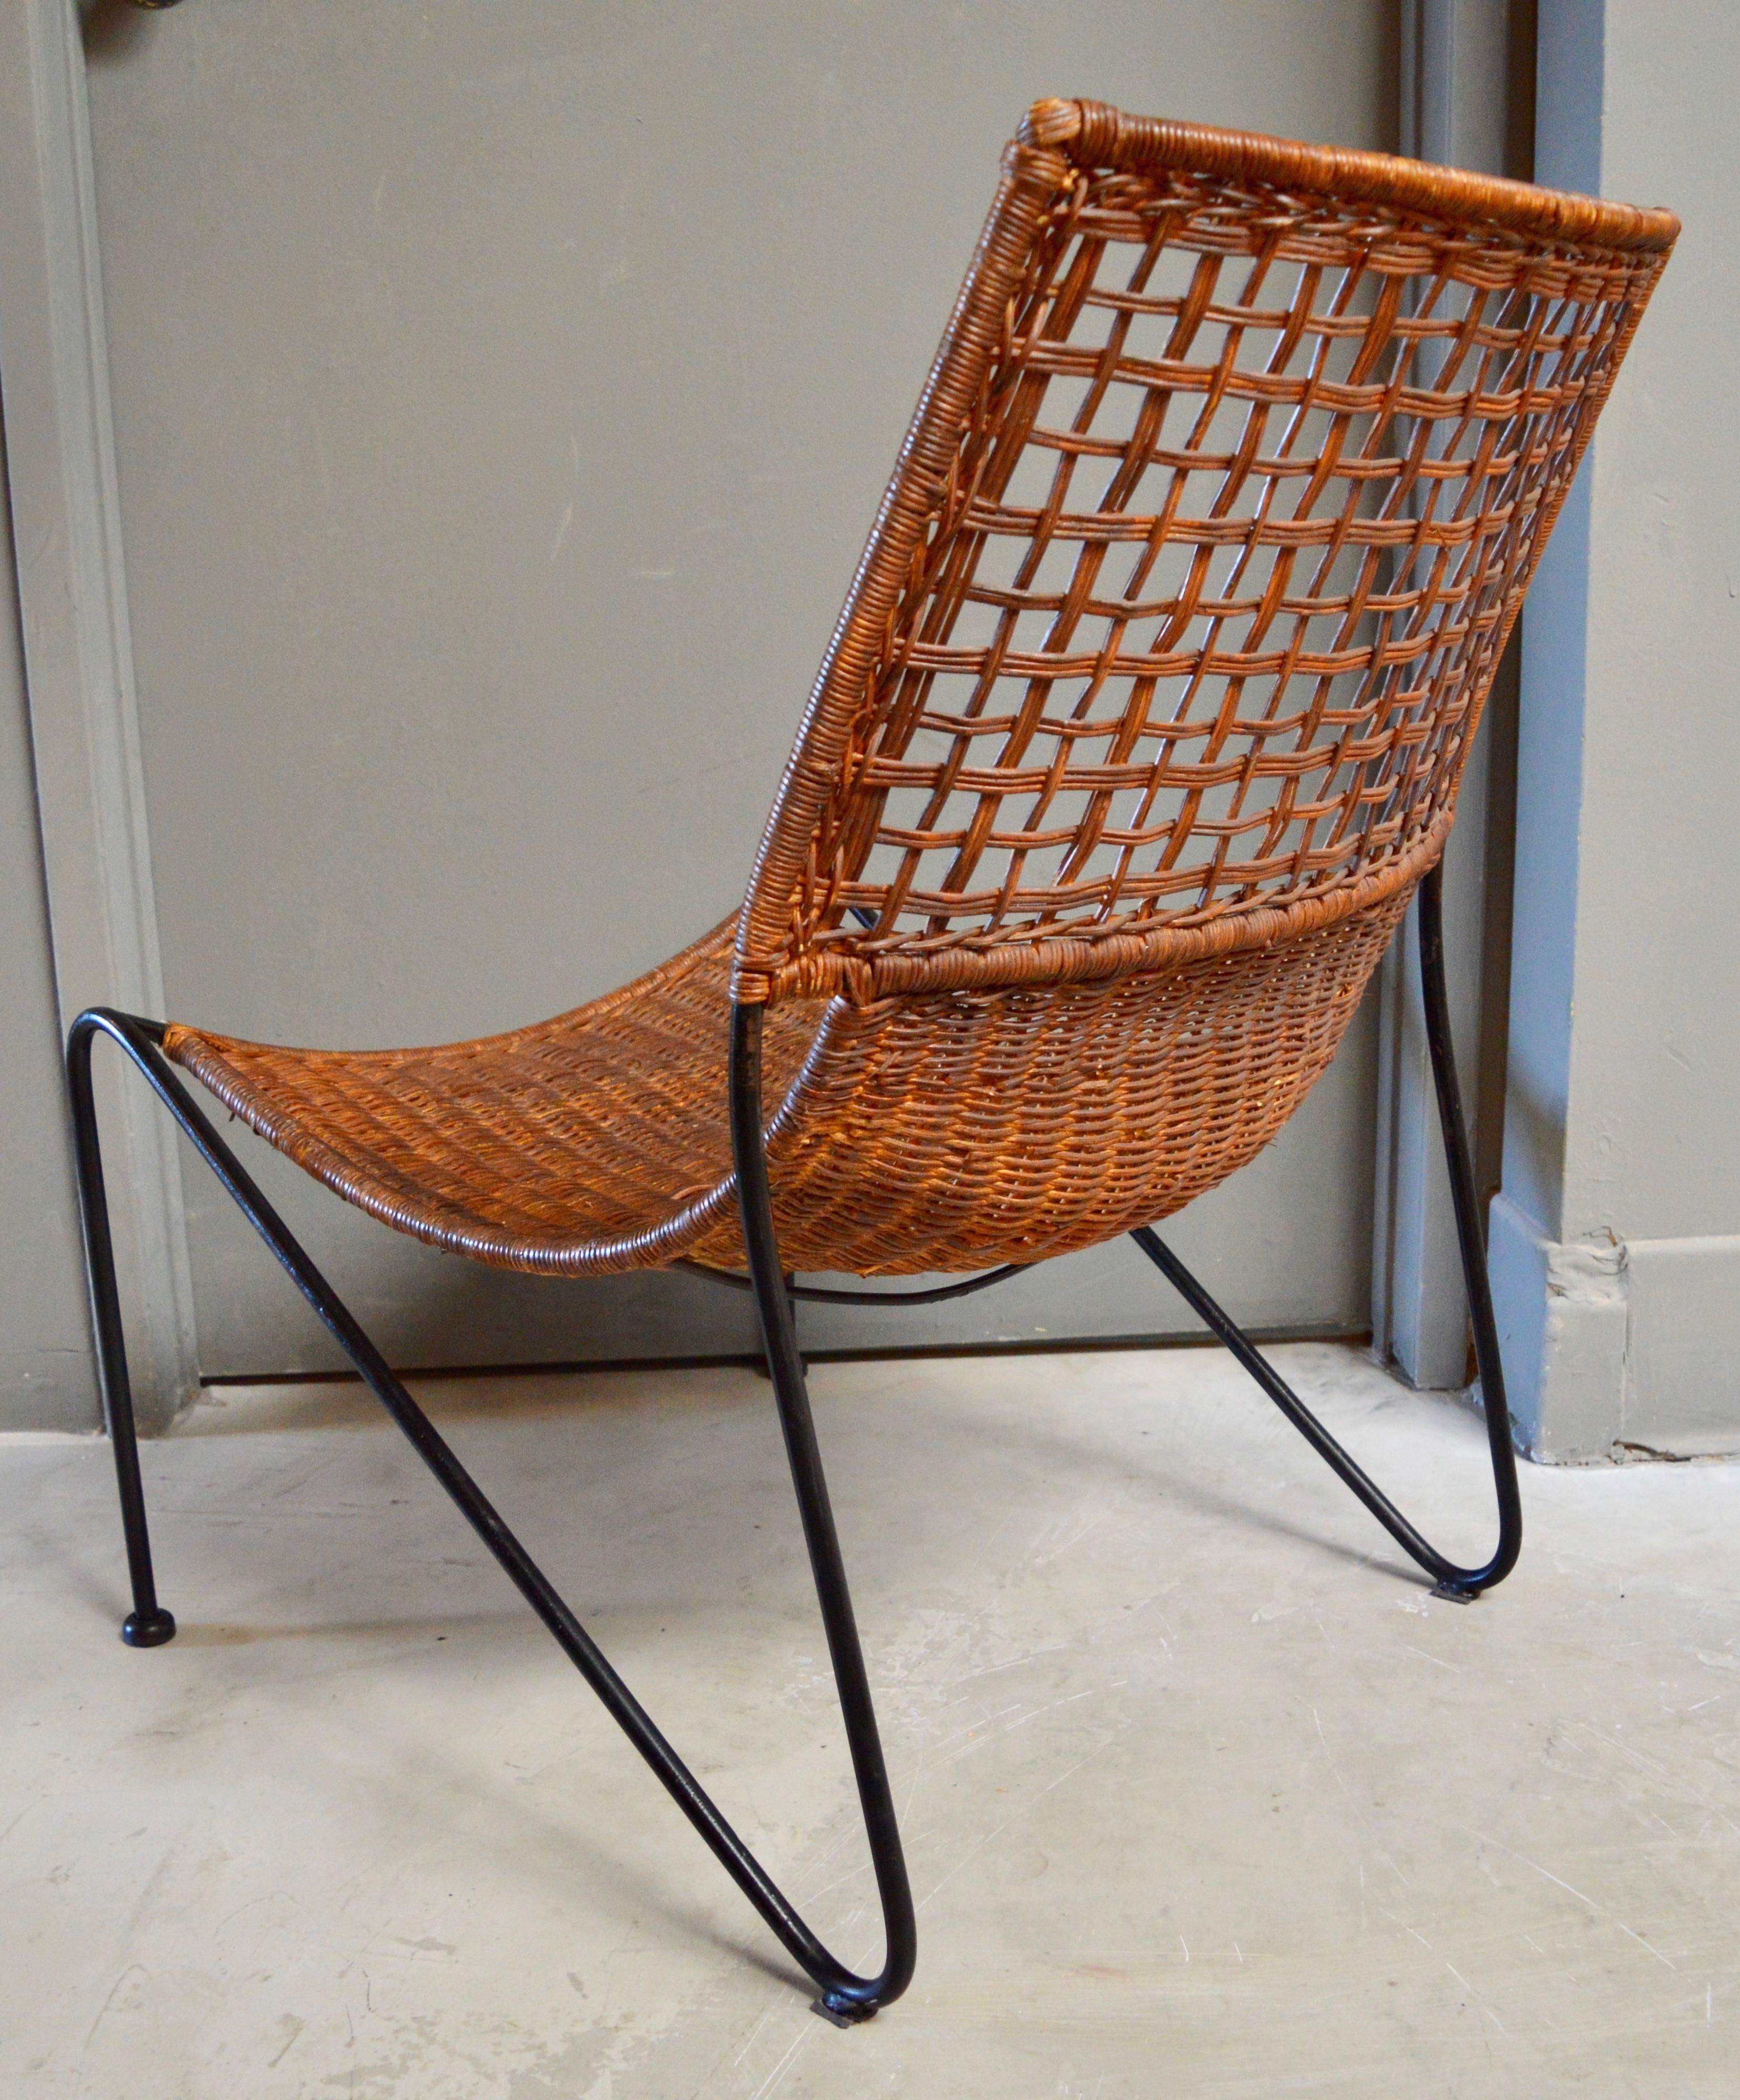 North American Sculptural Iron and Wicker Chairs in the style of Tempestini